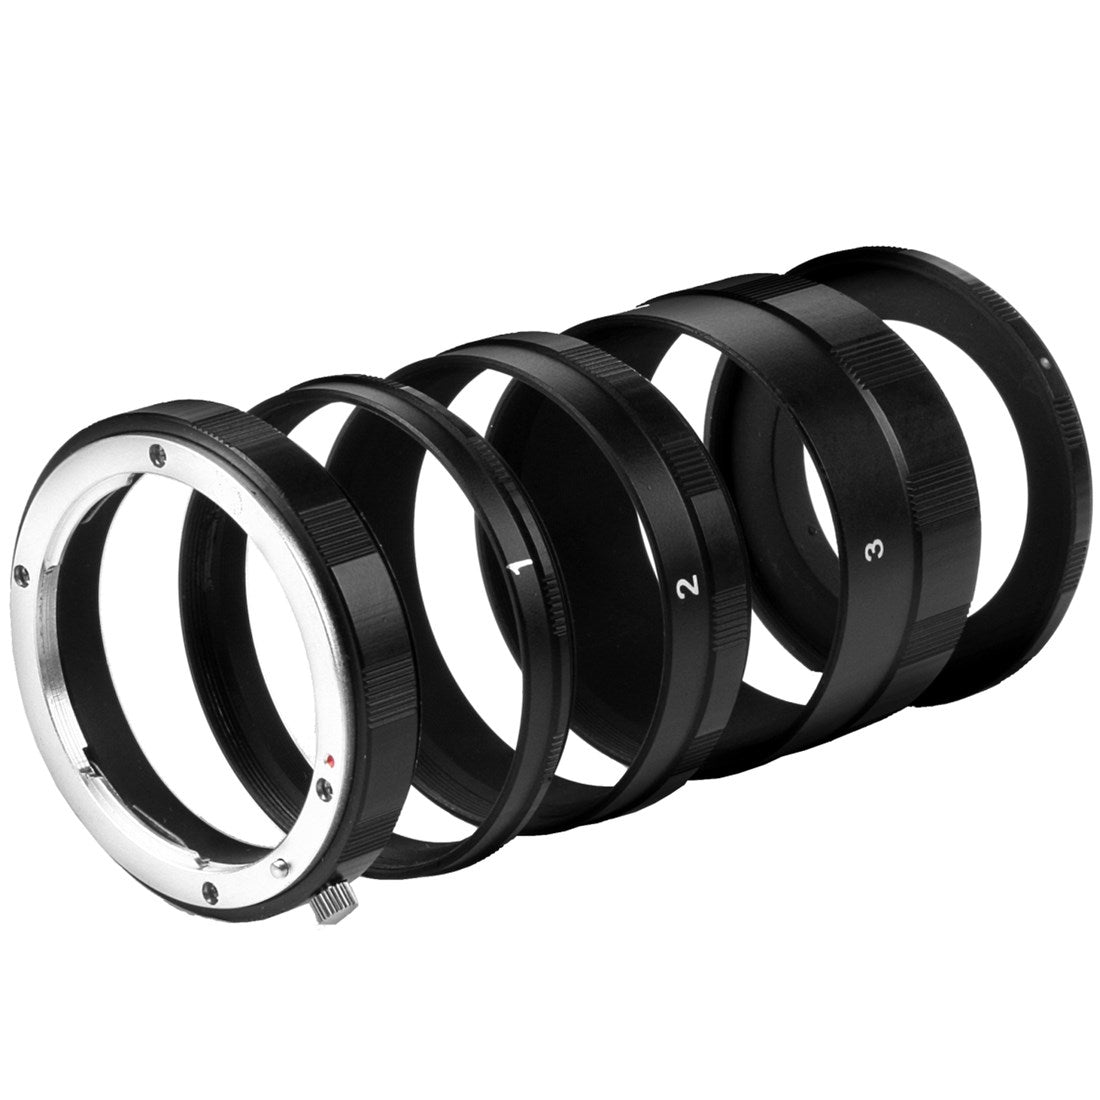 Product Image of Walimex pro Macro Intermediate extension tube Ring Set for Nikon